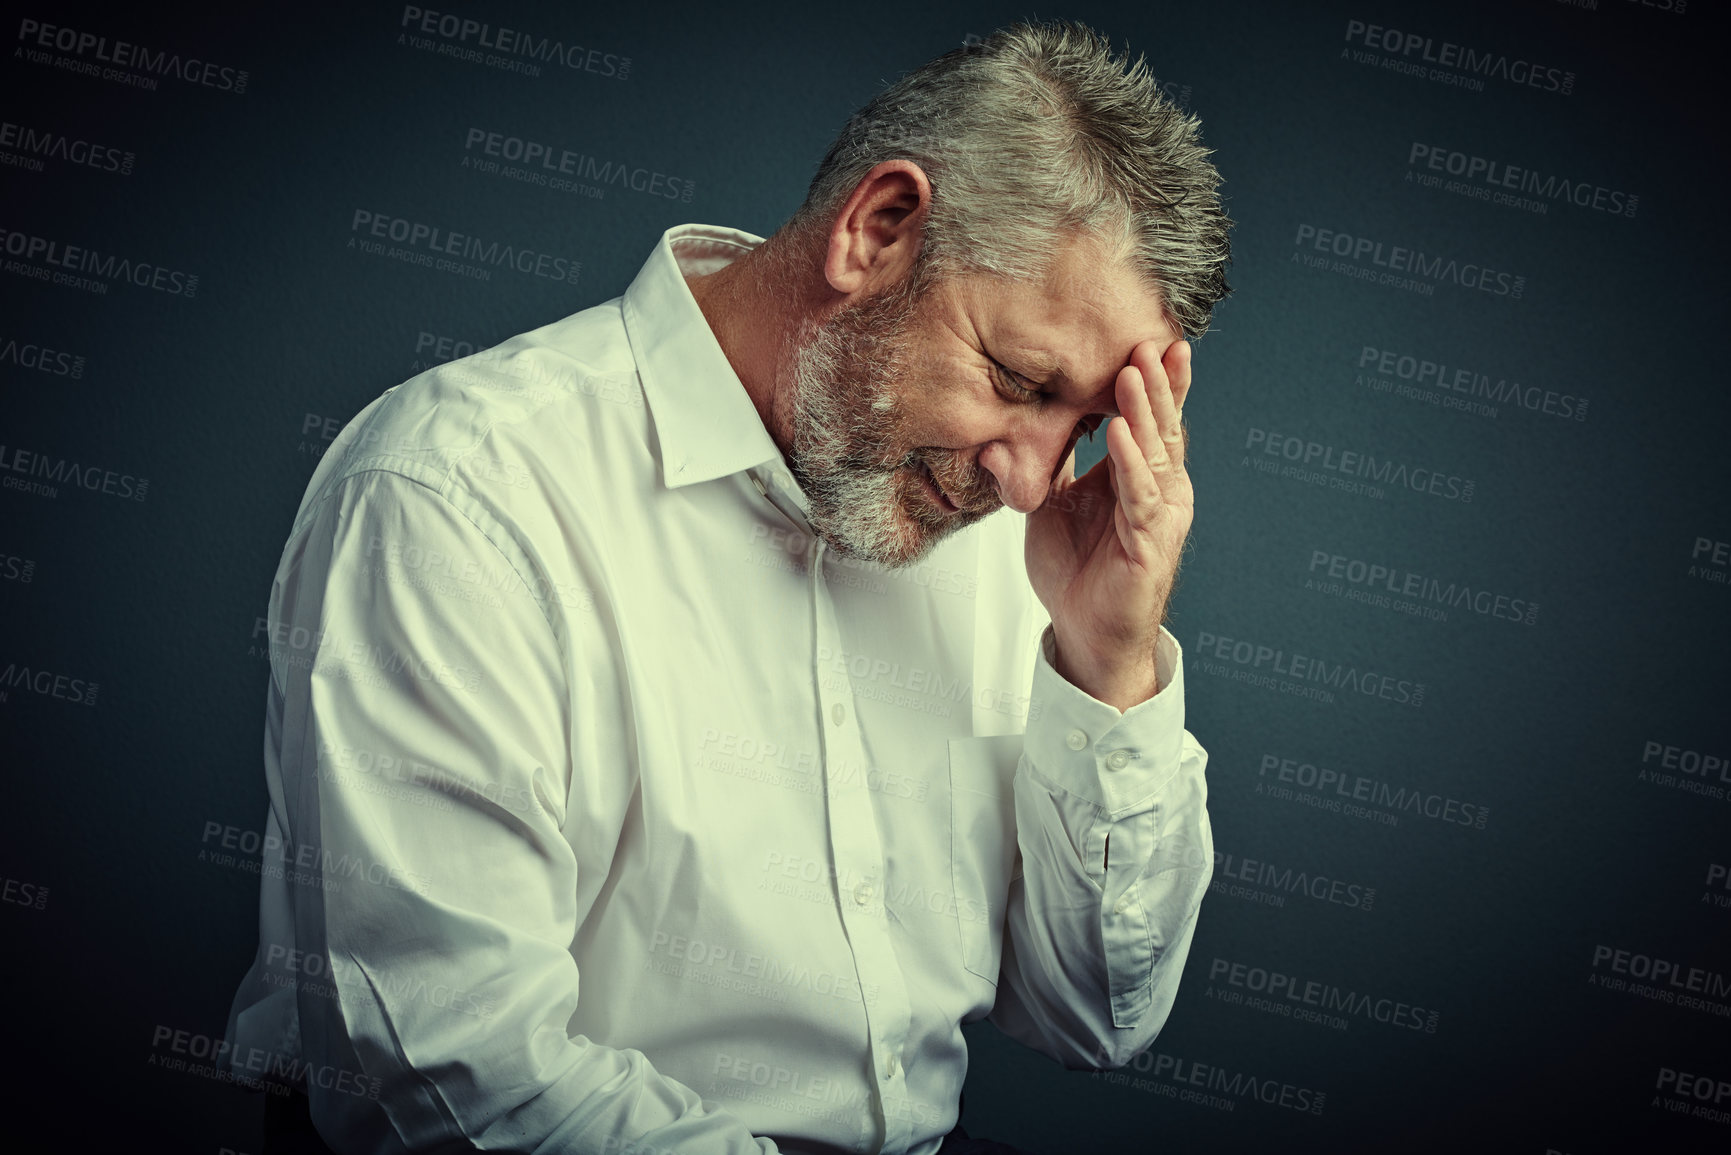 Buy stock photo Studio shot of a mature businessman looking stressed while sitting down against a dark background